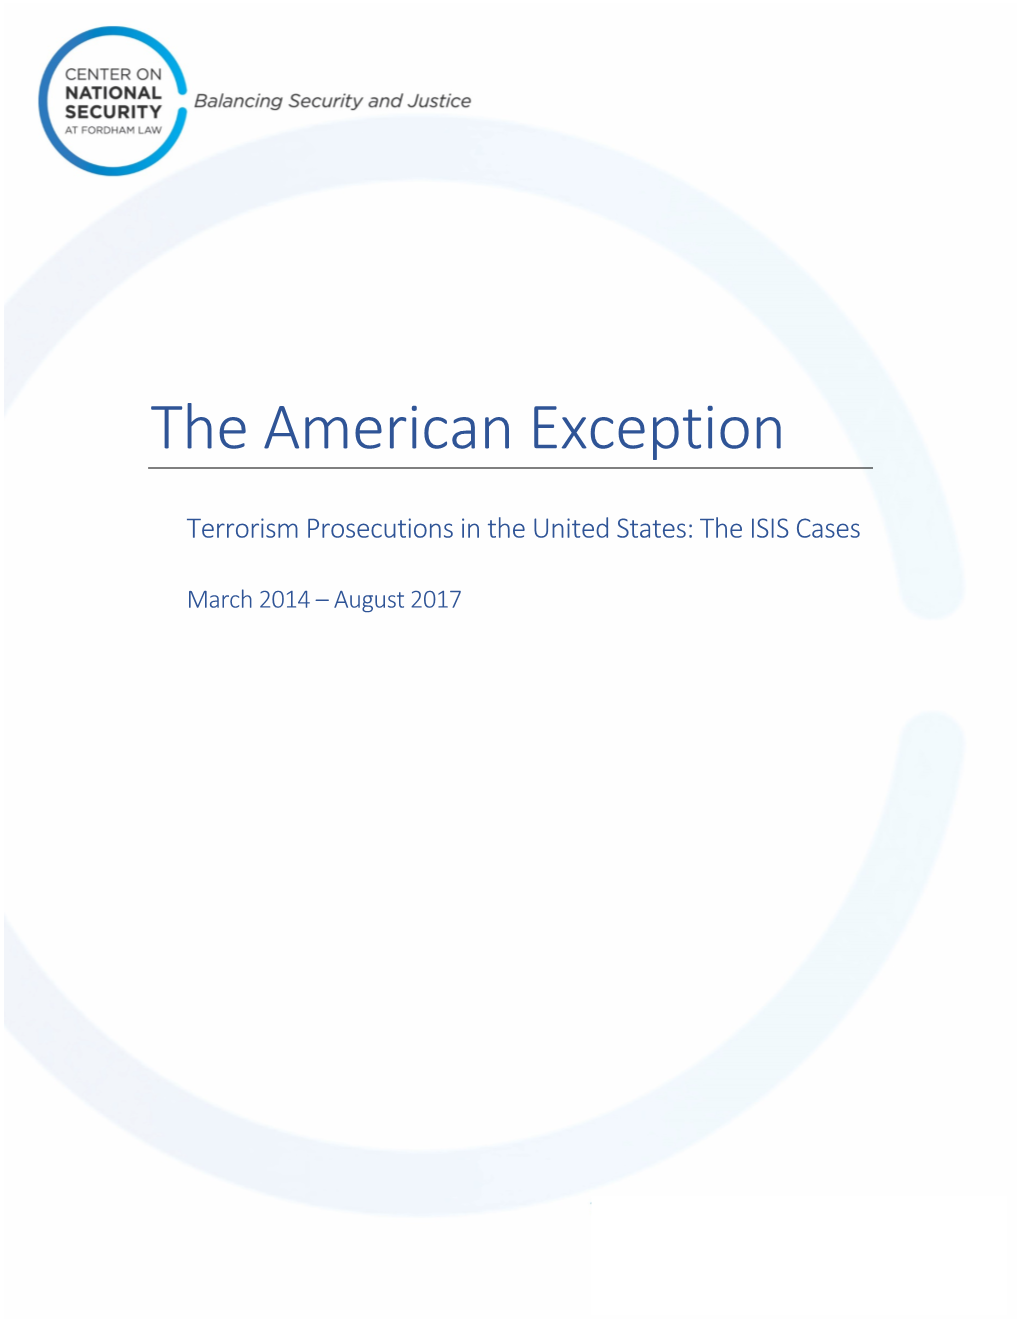 The American Exception: Terrorism Prosecutions in the United States